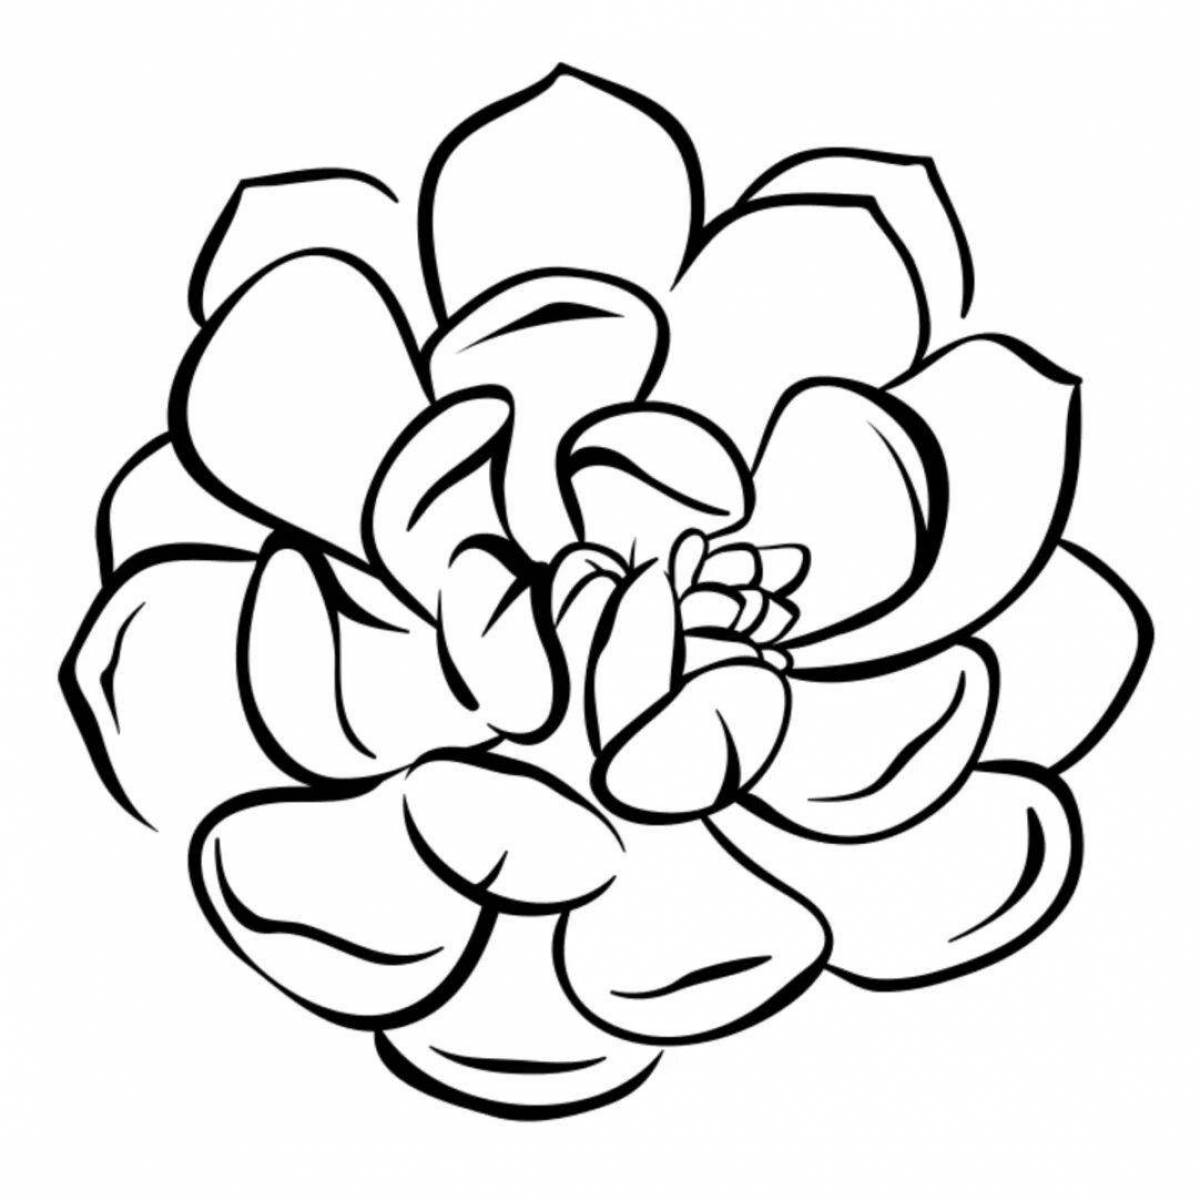 Dazzling coloring pages of succulents